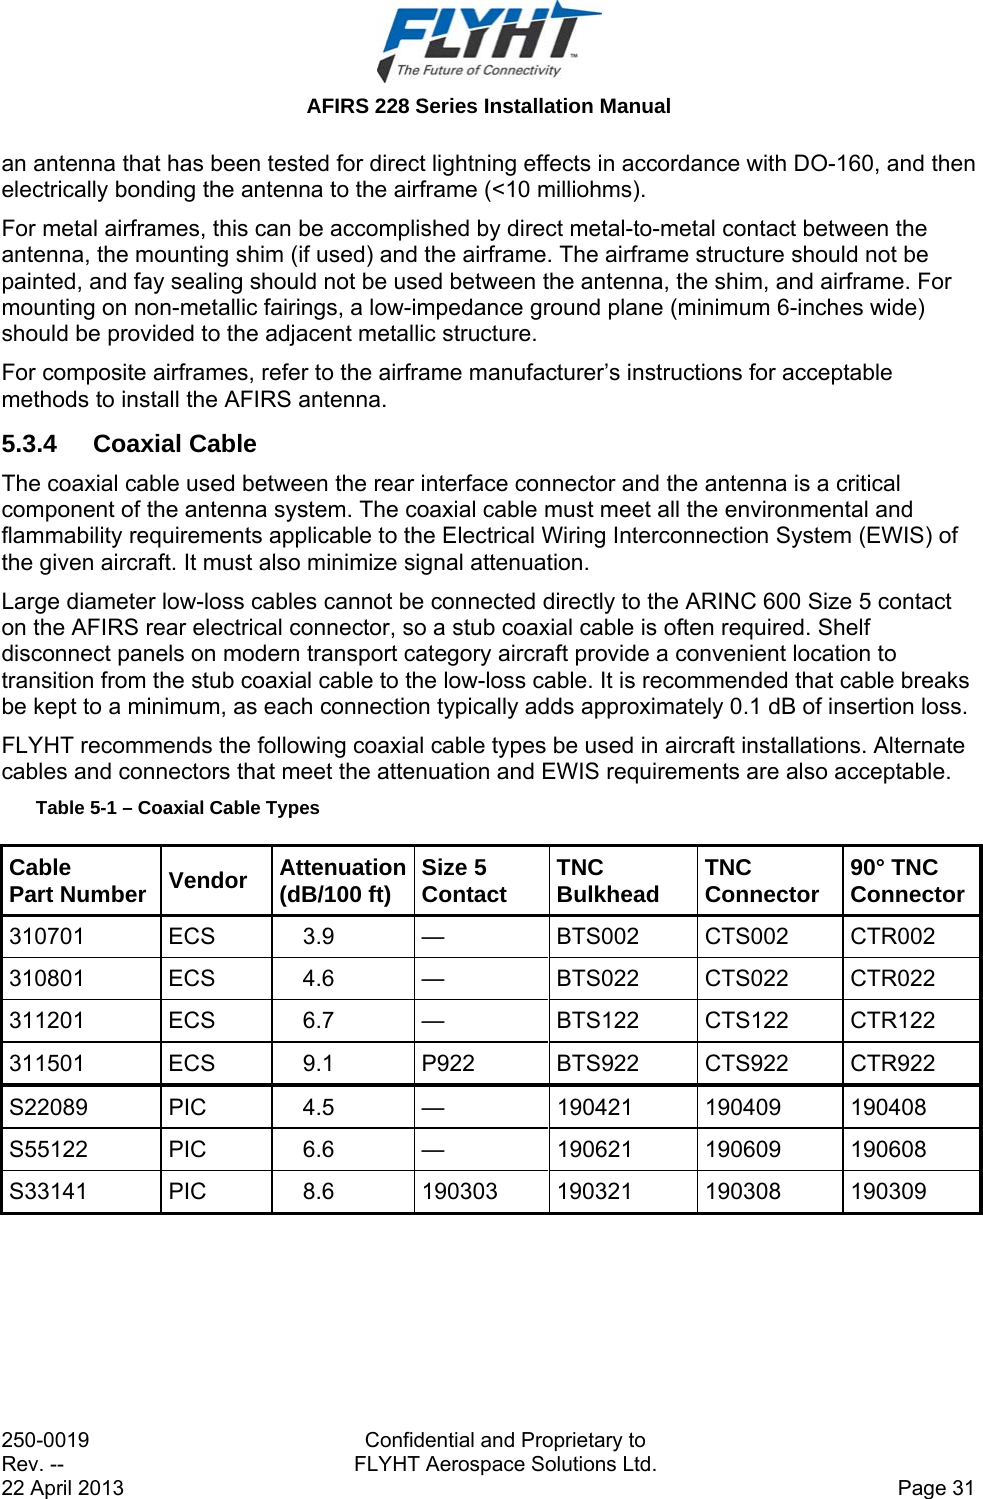  AFIRS 228 Series Installation Manual 250-0019  Confidential and Proprietary to Rev. --  FLYHT Aerospace Solutions Ltd. 22 April 2013    Page 31 an antenna that has been tested for direct lightning effects in accordance with DO-160, and then electrically bonding the antenna to the airframe (&lt;10 milliohms). For metal airframes, this can be accomplished by direct metal-to-metal contact between the antenna, the mounting shim (if used) and the airframe. The airframe structure should not be painted, and fay sealing should not be used between the antenna, the shim, and airframe. For mounting on non-metallic fairings, a low-impedance ground plane (minimum 6-inches wide) should be provided to the adjacent metallic structure. For composite airframes, refer to the airframe manufacturer’s instructions for acceptable methods to install the AFIRS antenna. 5.3.4 Coaxial Cable The coaxial cable used between the rear interface connector and the antenna is a critical component of the antenna system. The coaxial cable must meet all the environmental and flammability requirements applicable to the Electrical Wiring Interconnection System (EWIS) of the given aircraft. It must also minimize signal attenuation. Large diameter low-loss cables cannot be connected directly to the ARINC 600 Size 5 contact on the AFIRS rear electrical connector, so a stub coaxial cable is often required. Shelf disconnect panels on modern transport category aircraft provide a convenient location to transition from the stub coaxial cable to the low-loss cable. It is recommended that cable breaks be kept to a minimum, as each connection typically adds approximately 0.1 dB of insertion loss. FLYHT recommends the following coaxial cable types be used in aircraft installations. Alternate cables and connectors that meet the attenuation and EWIS requirements are also acceptable. Table 5-1 – Coaxial Cable Types Cable Part Number  Vendor  Attenuation(dB/100 ft)  Size 5 Contact  TNC Bulkhead  TNC Connector  90° TNC Connector 310701 ECS  3.9  —  BTS002 CTS002 CTR002 310801 ECS  4.6  —  BTS022 CTS022 CTR022 311201 ECS  6.7  —  BTS122 CTS122 CTR122 311501 ECS  9.1  P922 BTS922 CTS922 CTR922 S22089 PIC  4.5  —  190421 190409 190408 S55122 PIC  6.6  —  190621 190609 190608 S33141 PIC  8.6  190303 190321 190308 190309 